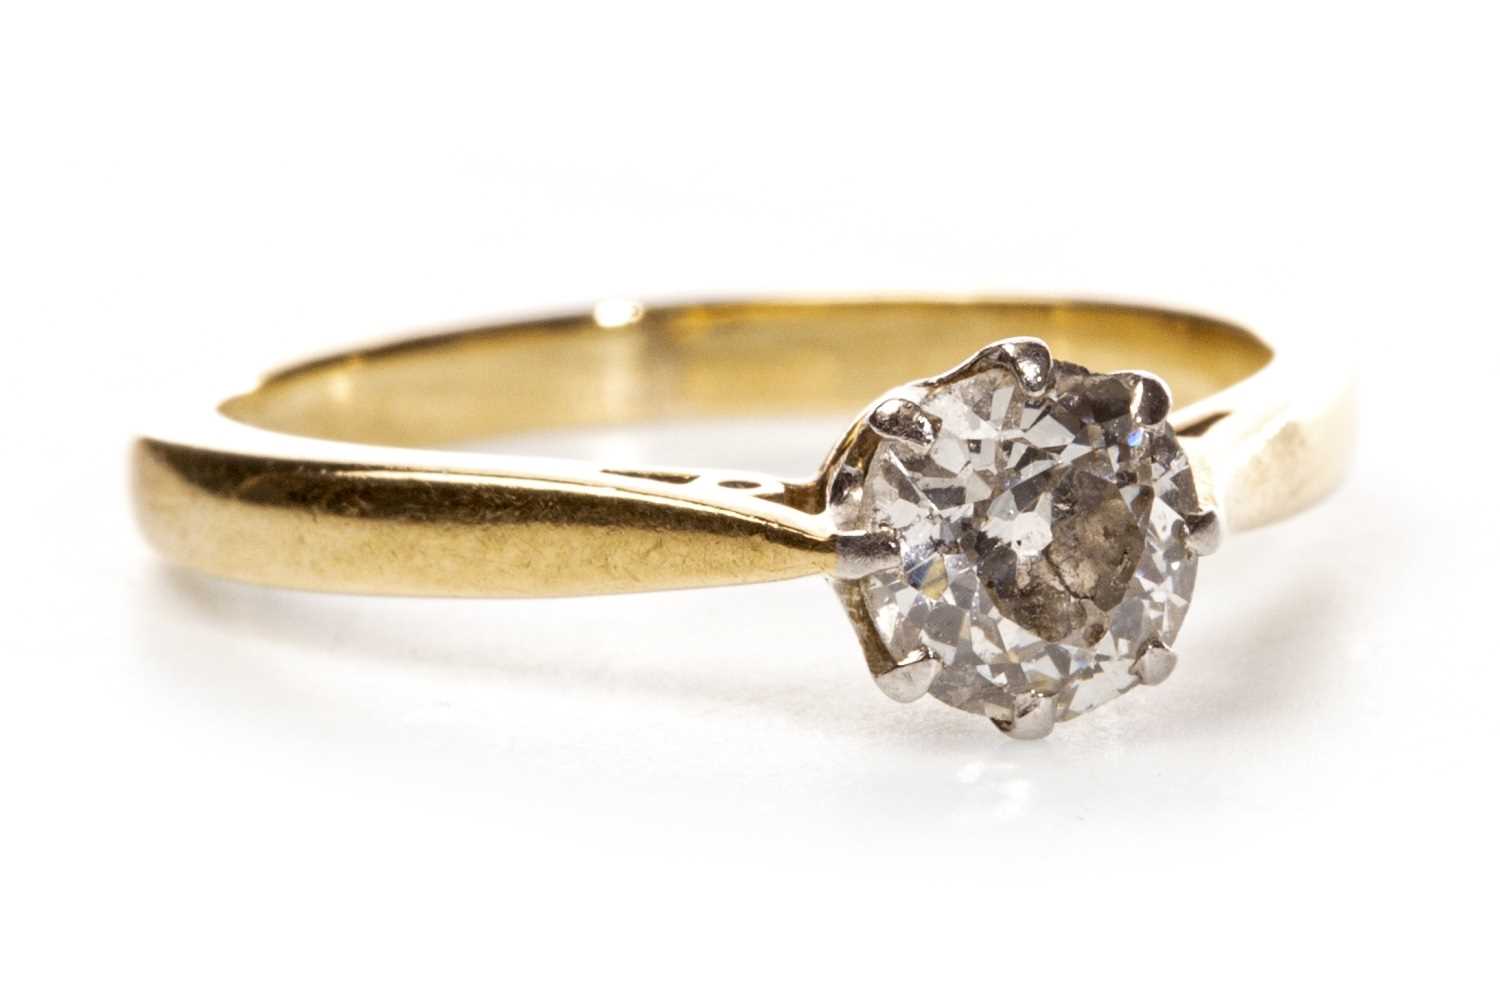 Lot 35 - A DIAMOND SOLITAIRE RING